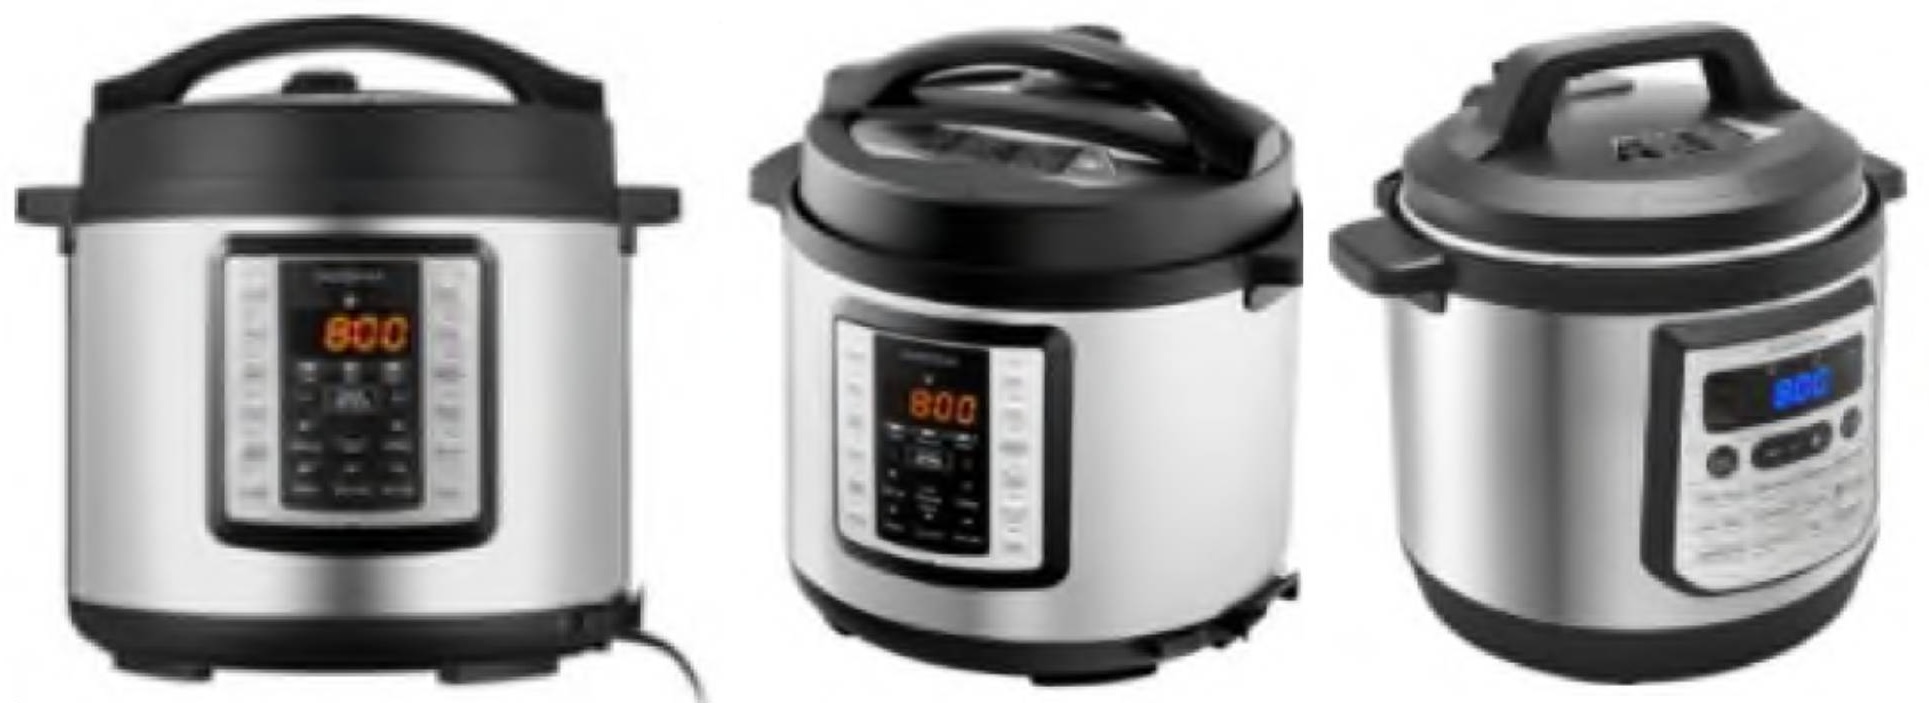 Insignia Multi-Functional Pressure Cooker How-To